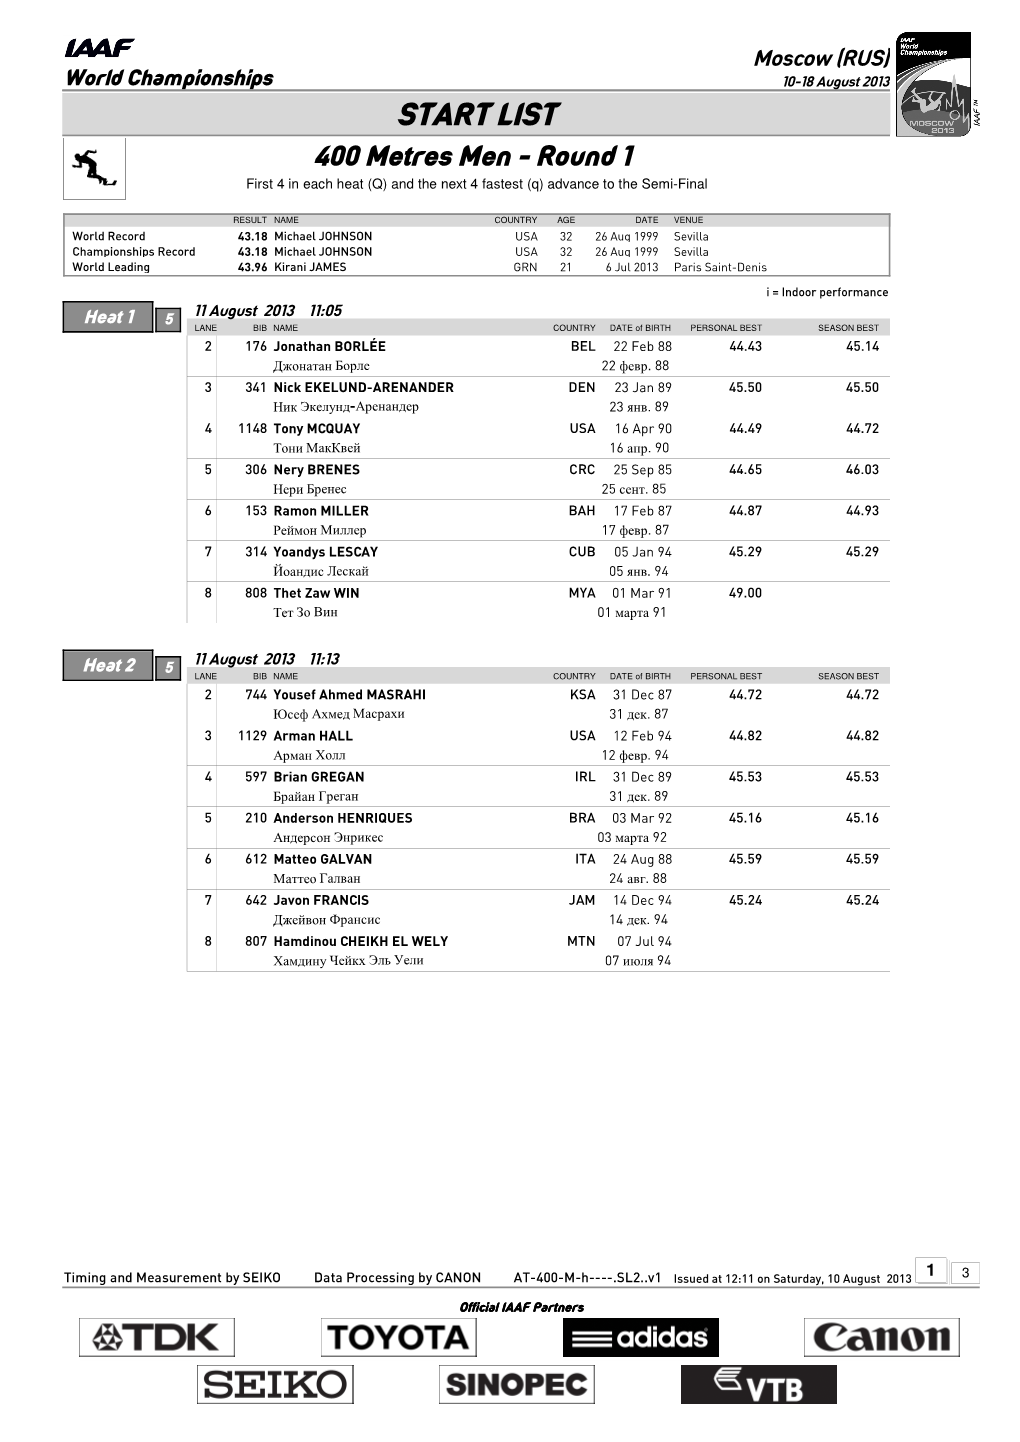 START LIST 400 Metres Men - Round 1 First 4 in Each Heat (Q) and the Next 4 Fastest (Q) Advance to the Semi-Final